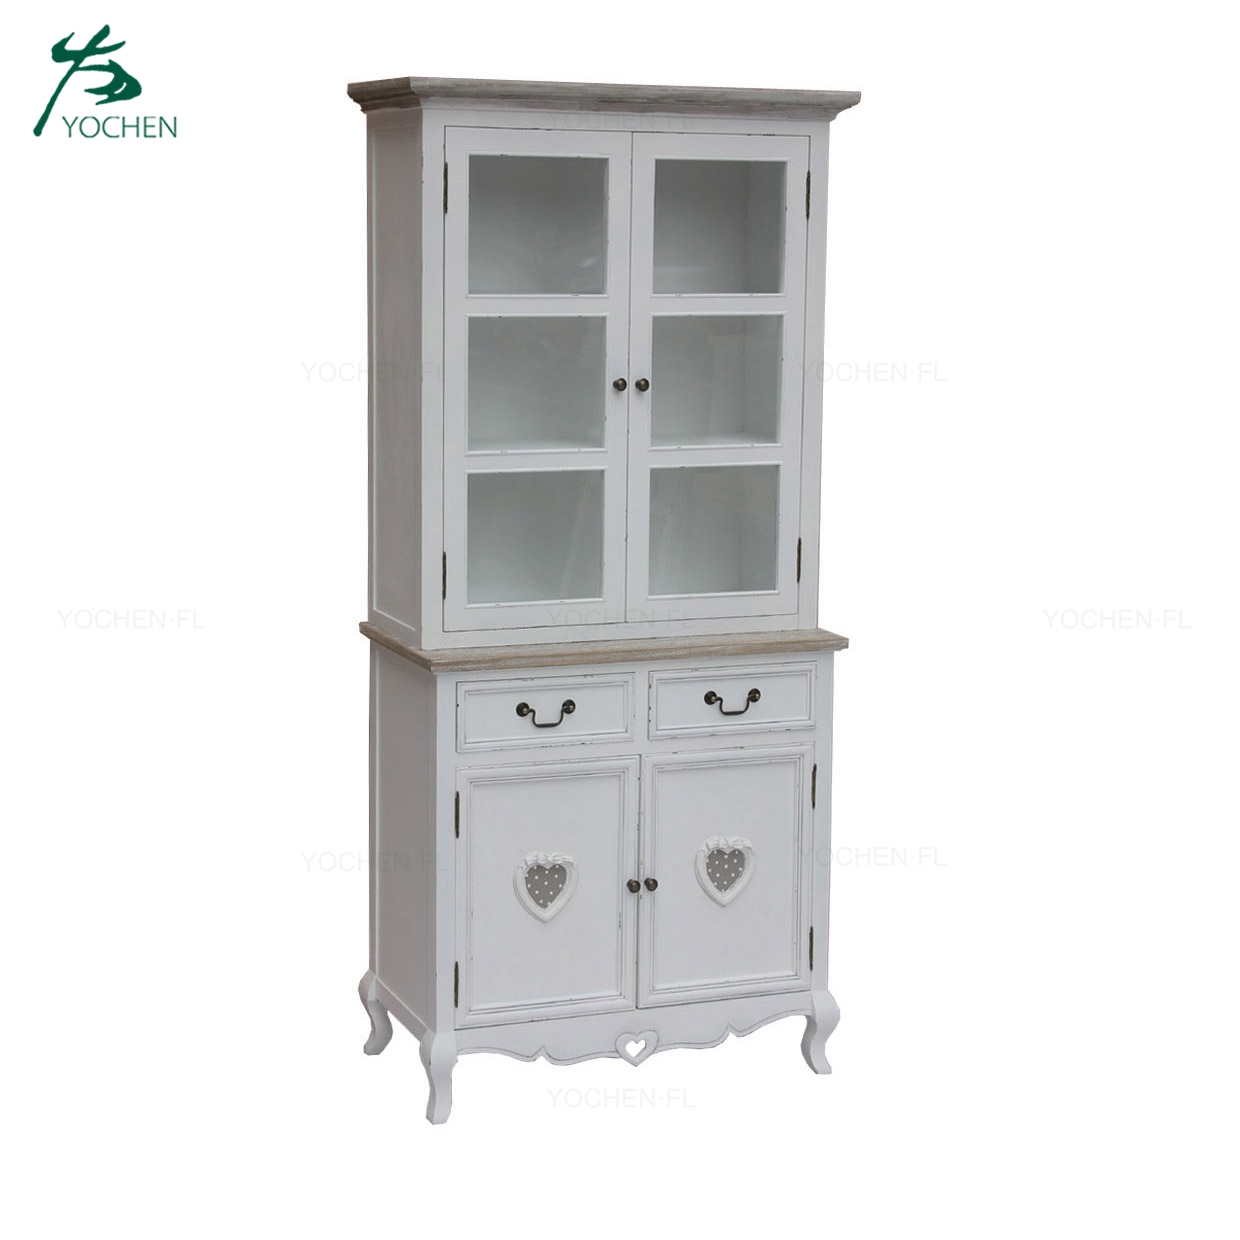 European style living room display tall cabinet with drawer